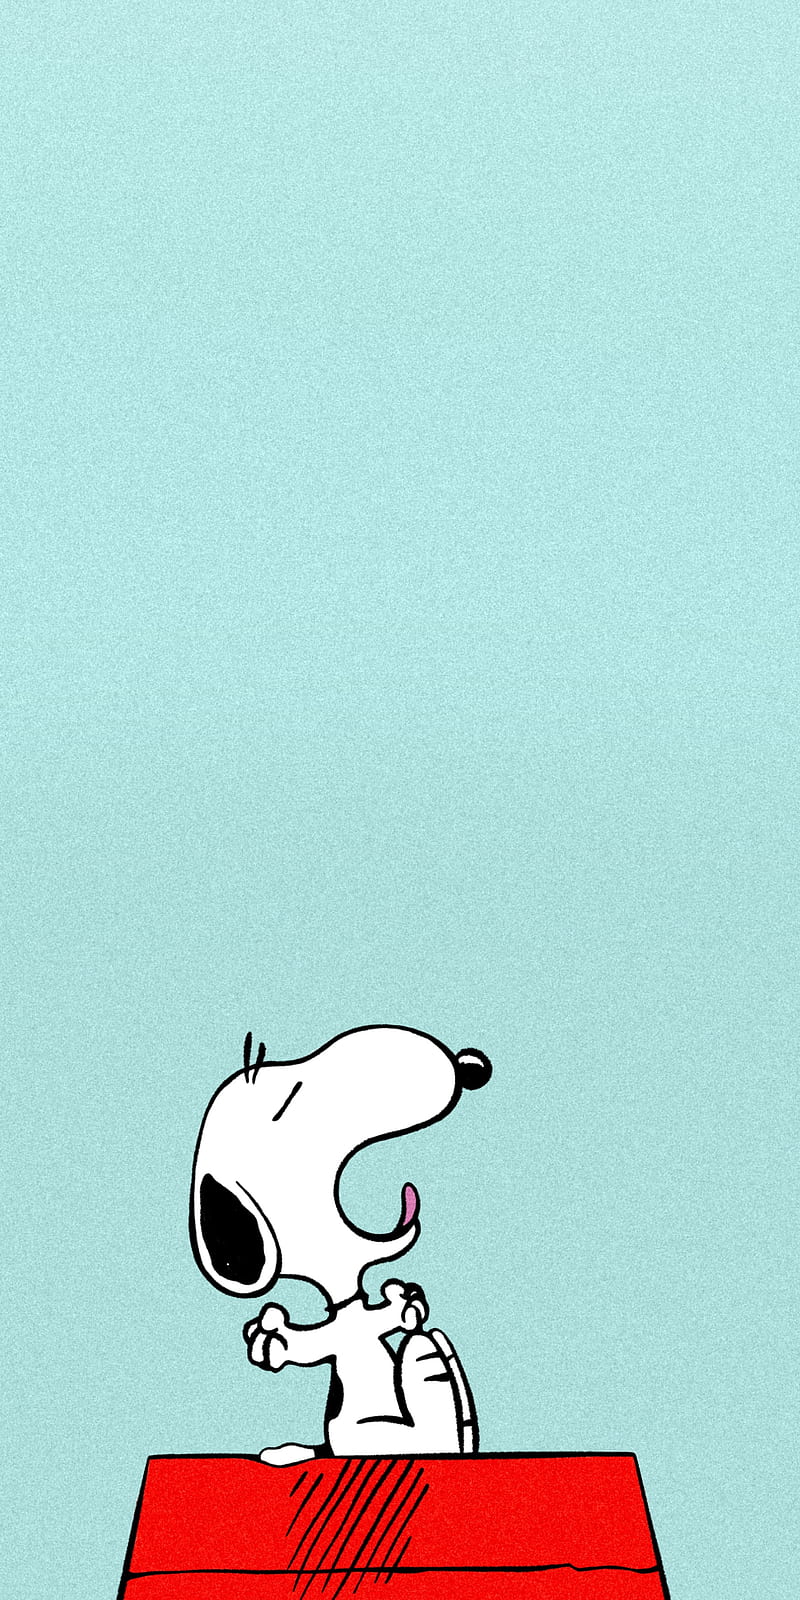 A cartoon of snoopy sitting on top - Snoopy